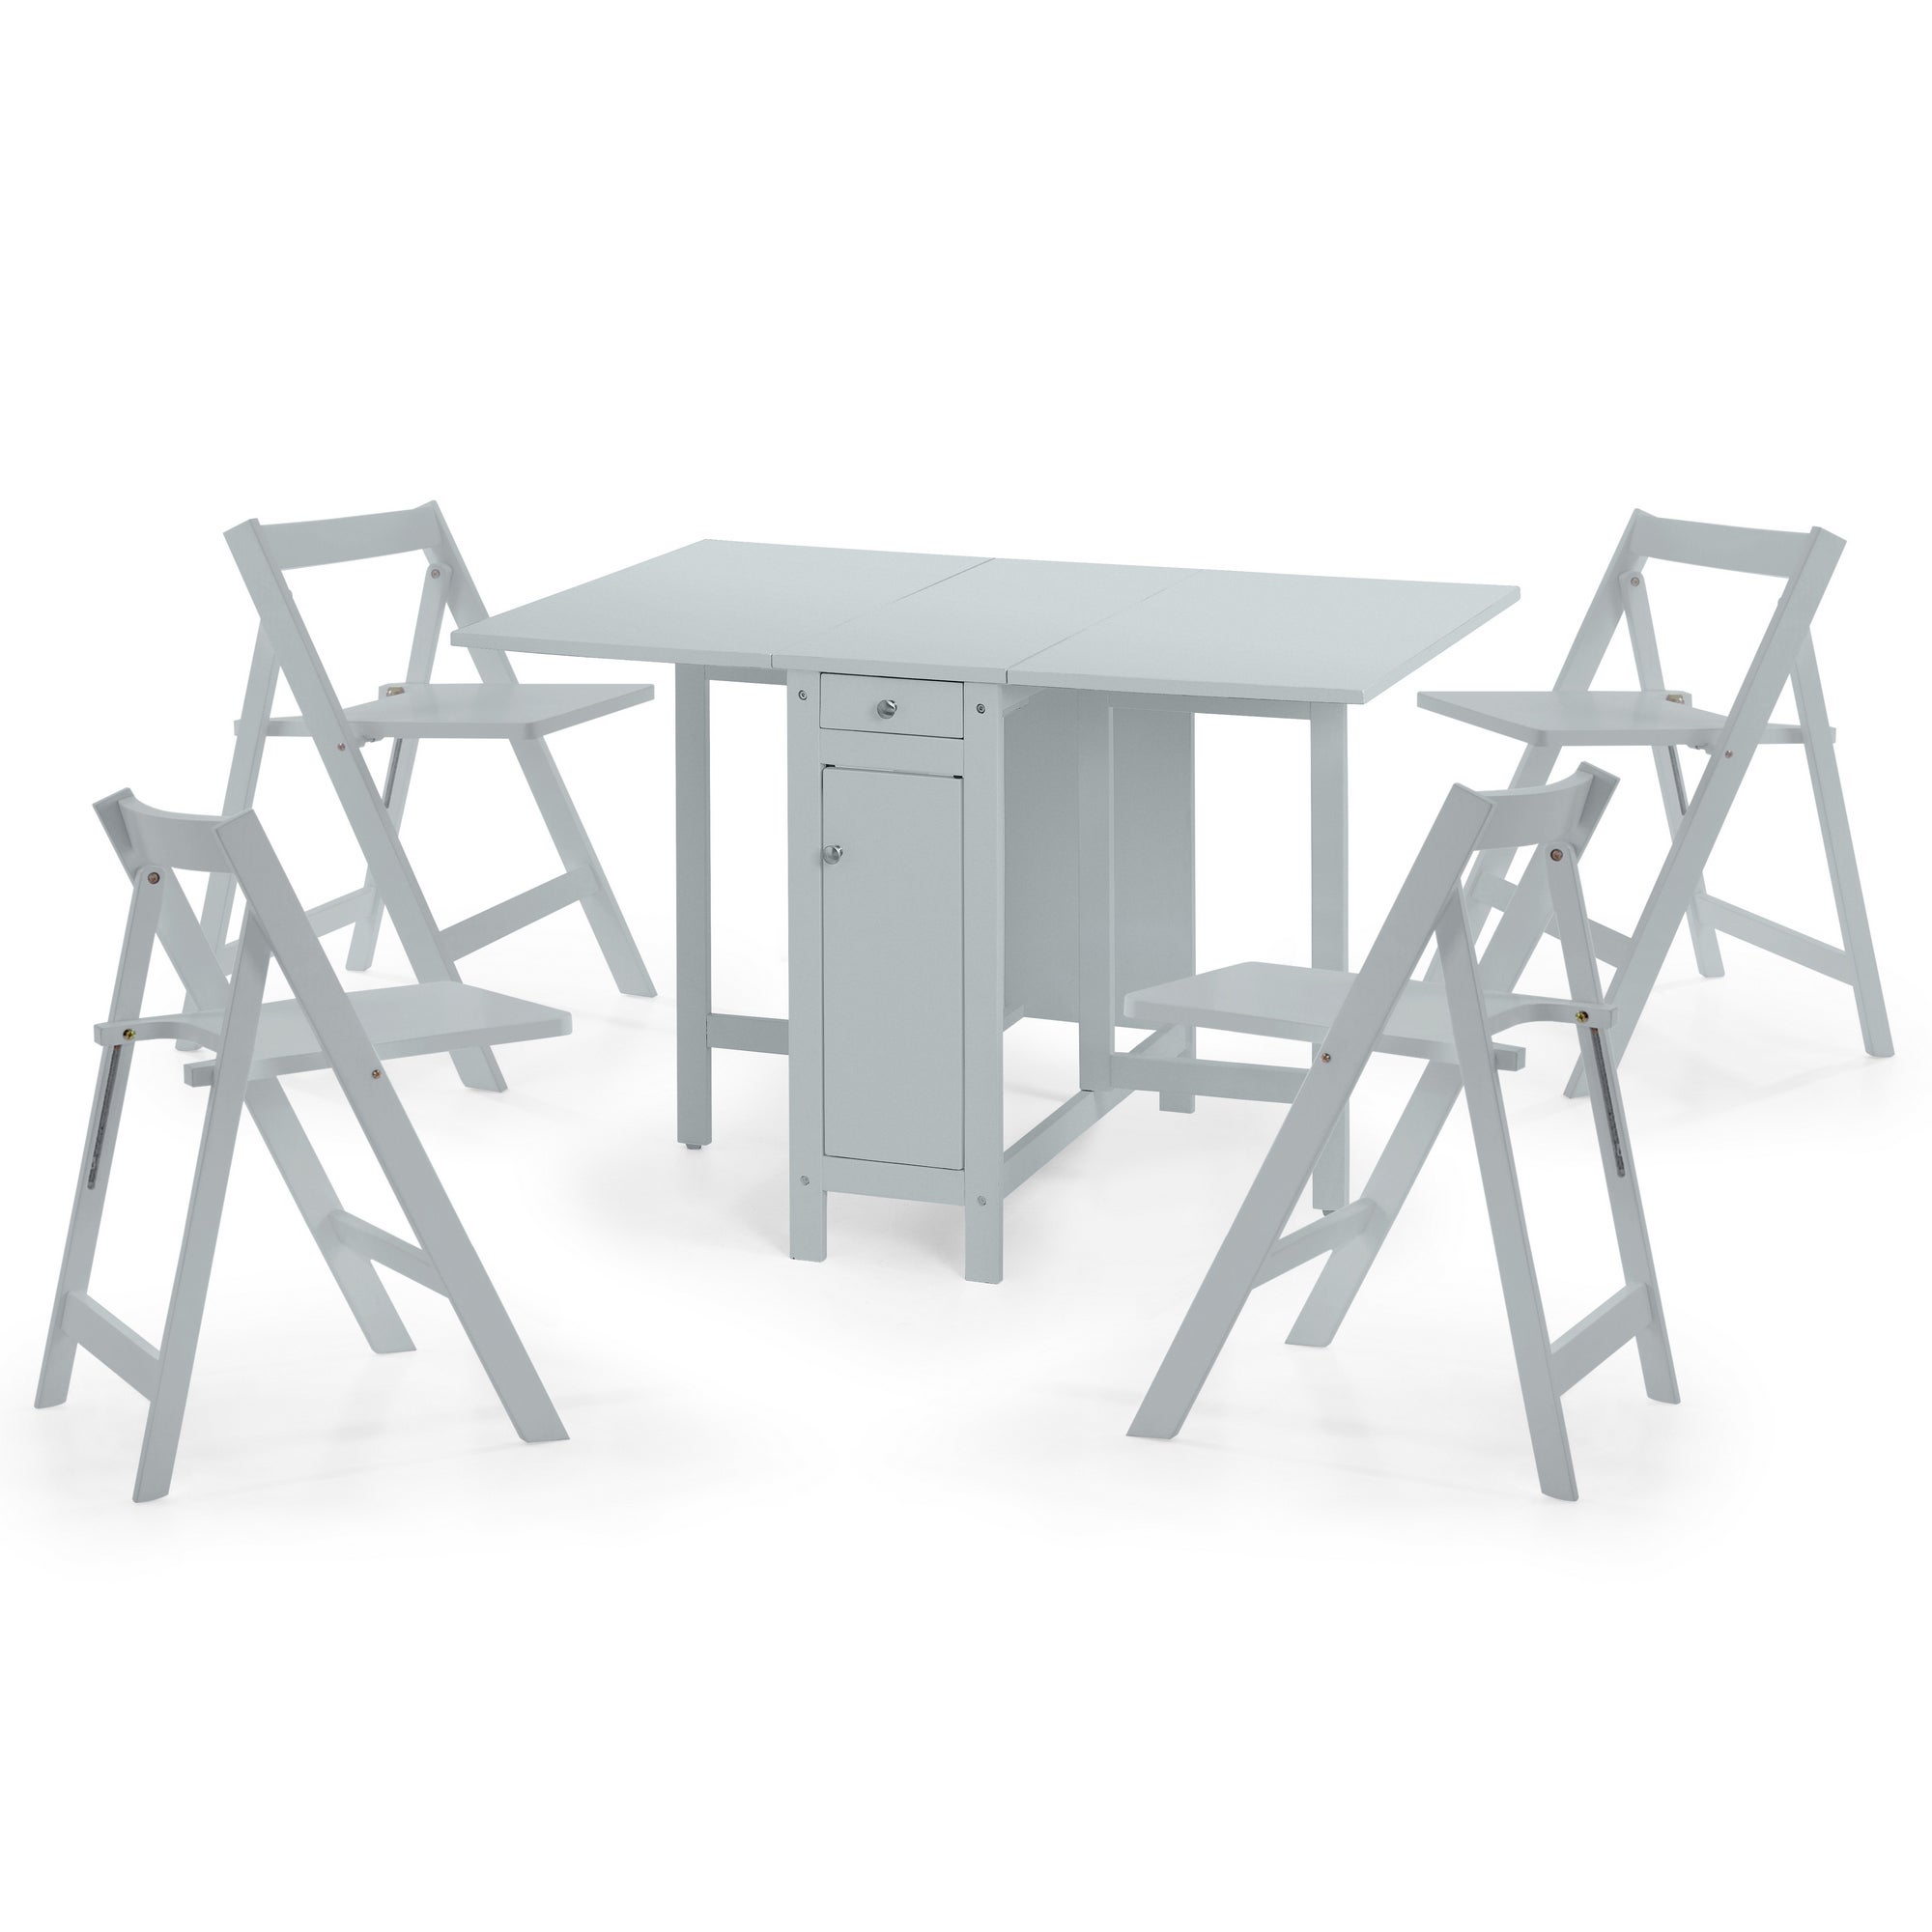 Savoy Rectangular Extendable Dining Table with 4 Chairs Grey